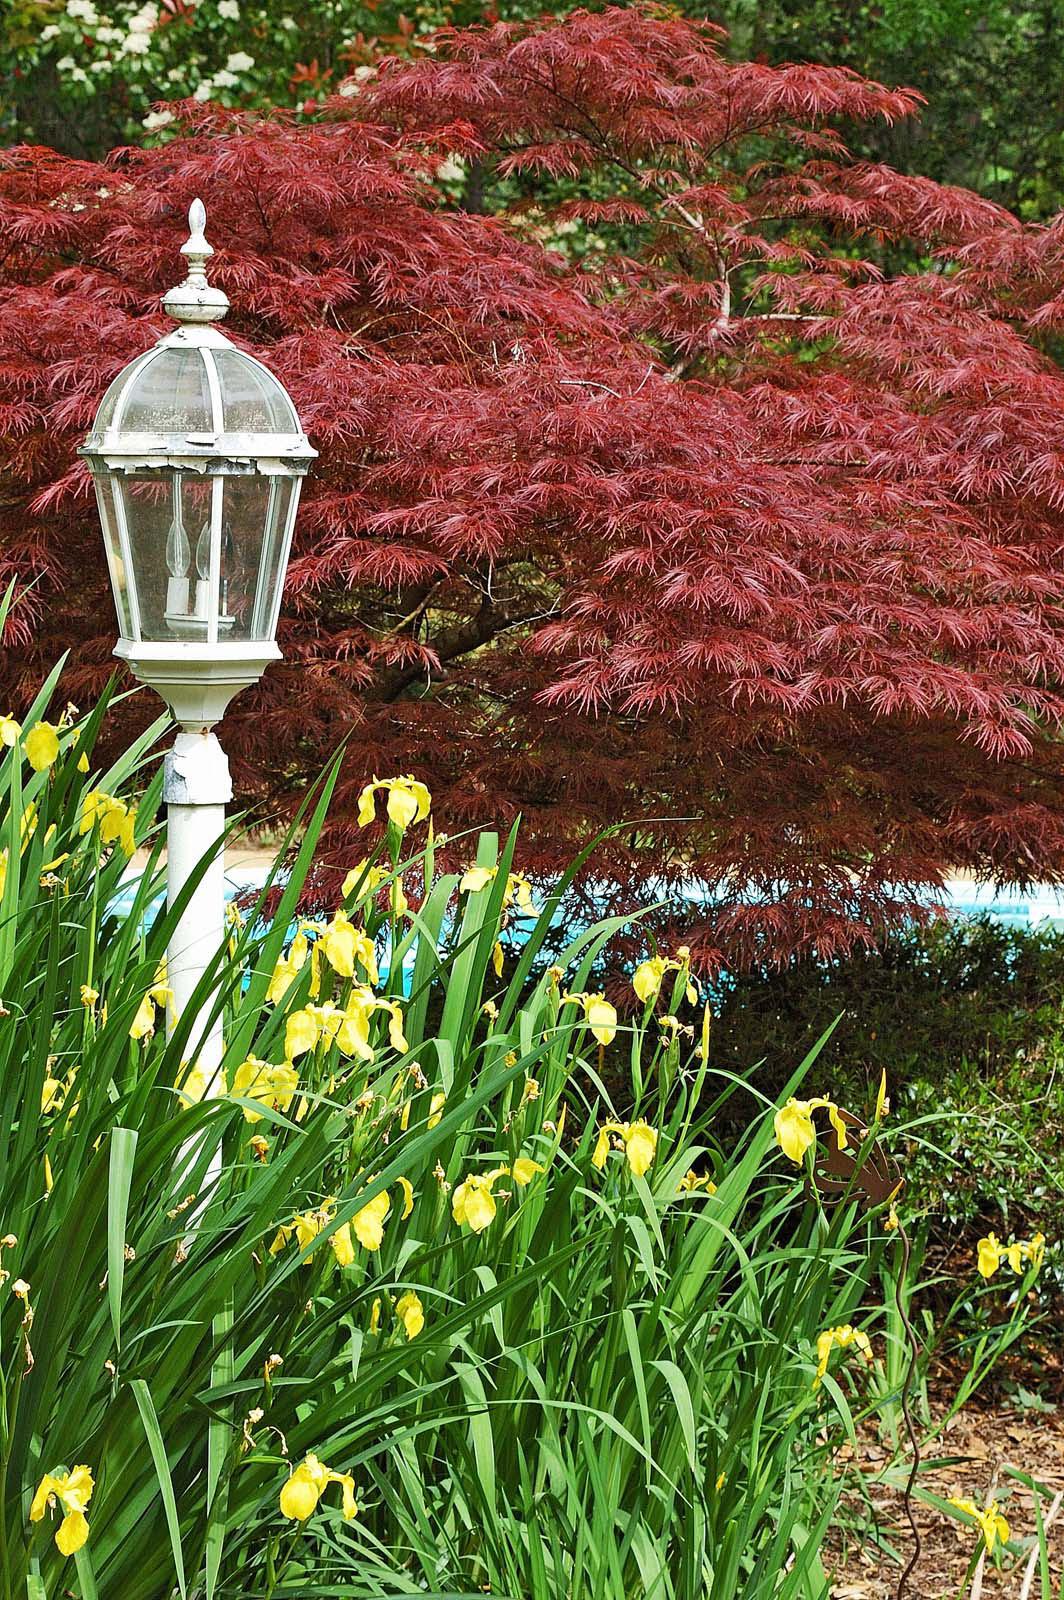 A Crimson Queen Japanese maple forms a brilliant backdrop for this yellow flag iris bed, which is set off by the white lamp. (Photo by Norman Winter)